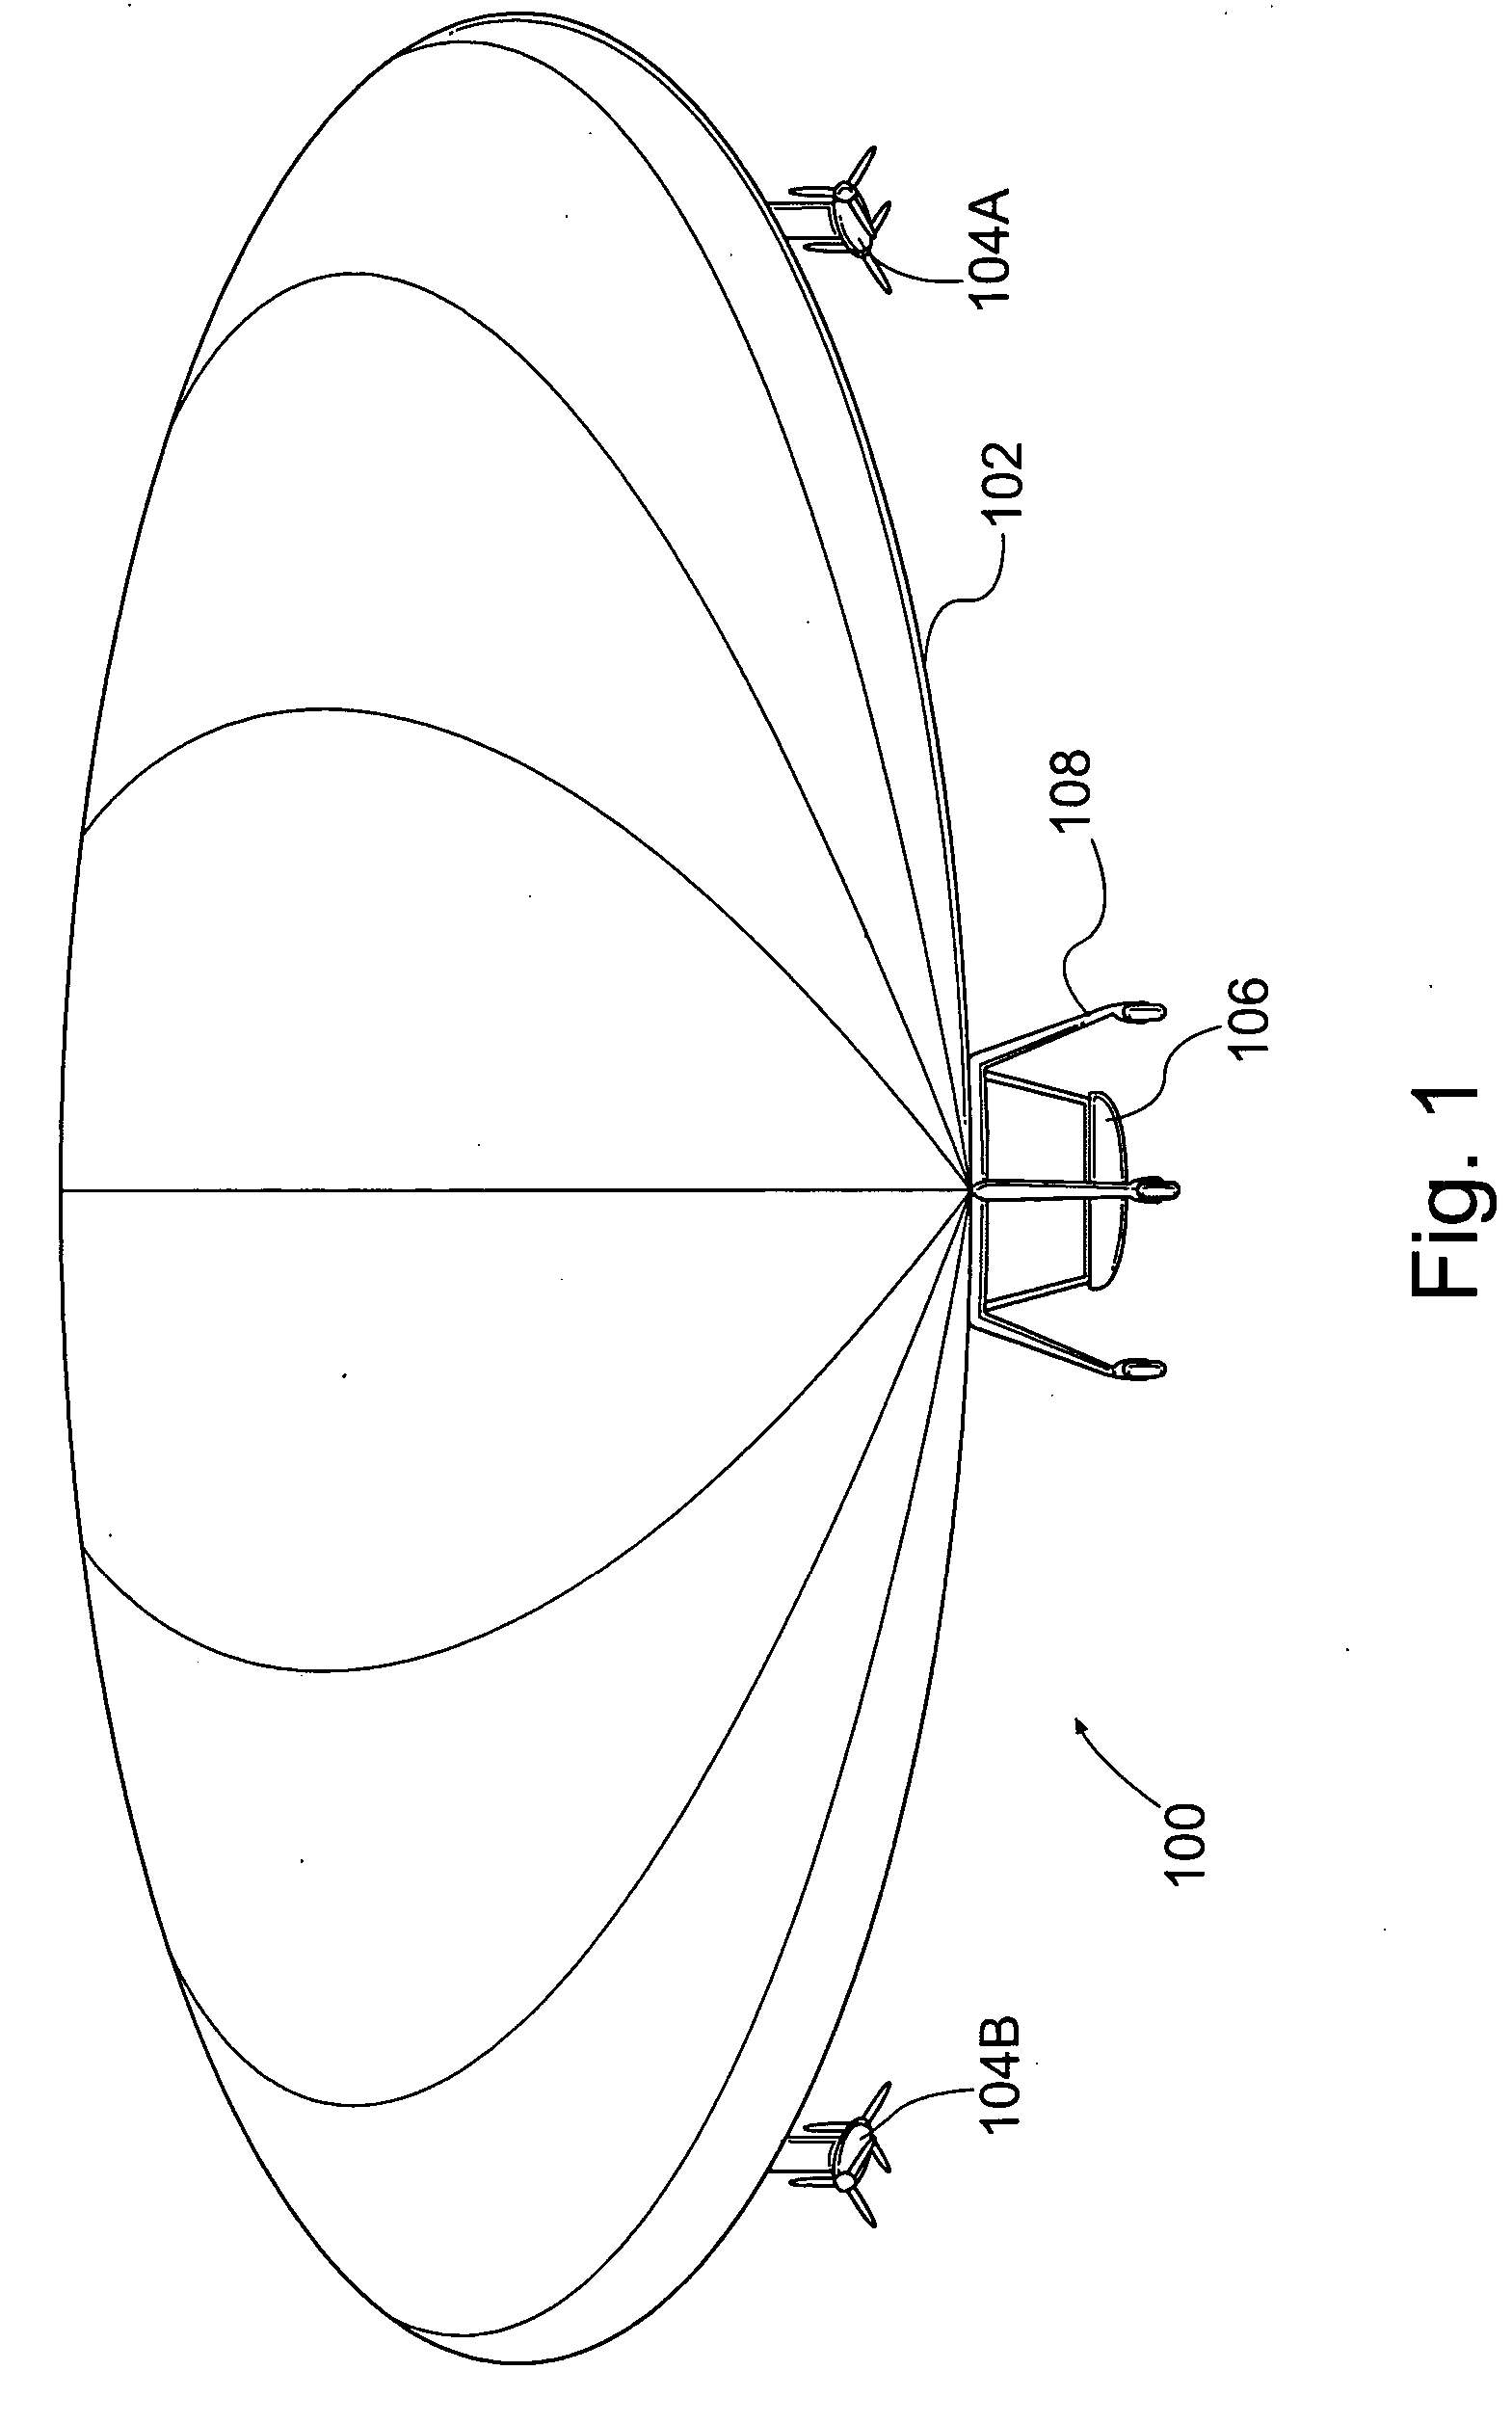 Mass transfer system for stabilizing an airship and other vehicles subject to pitch and roll moments